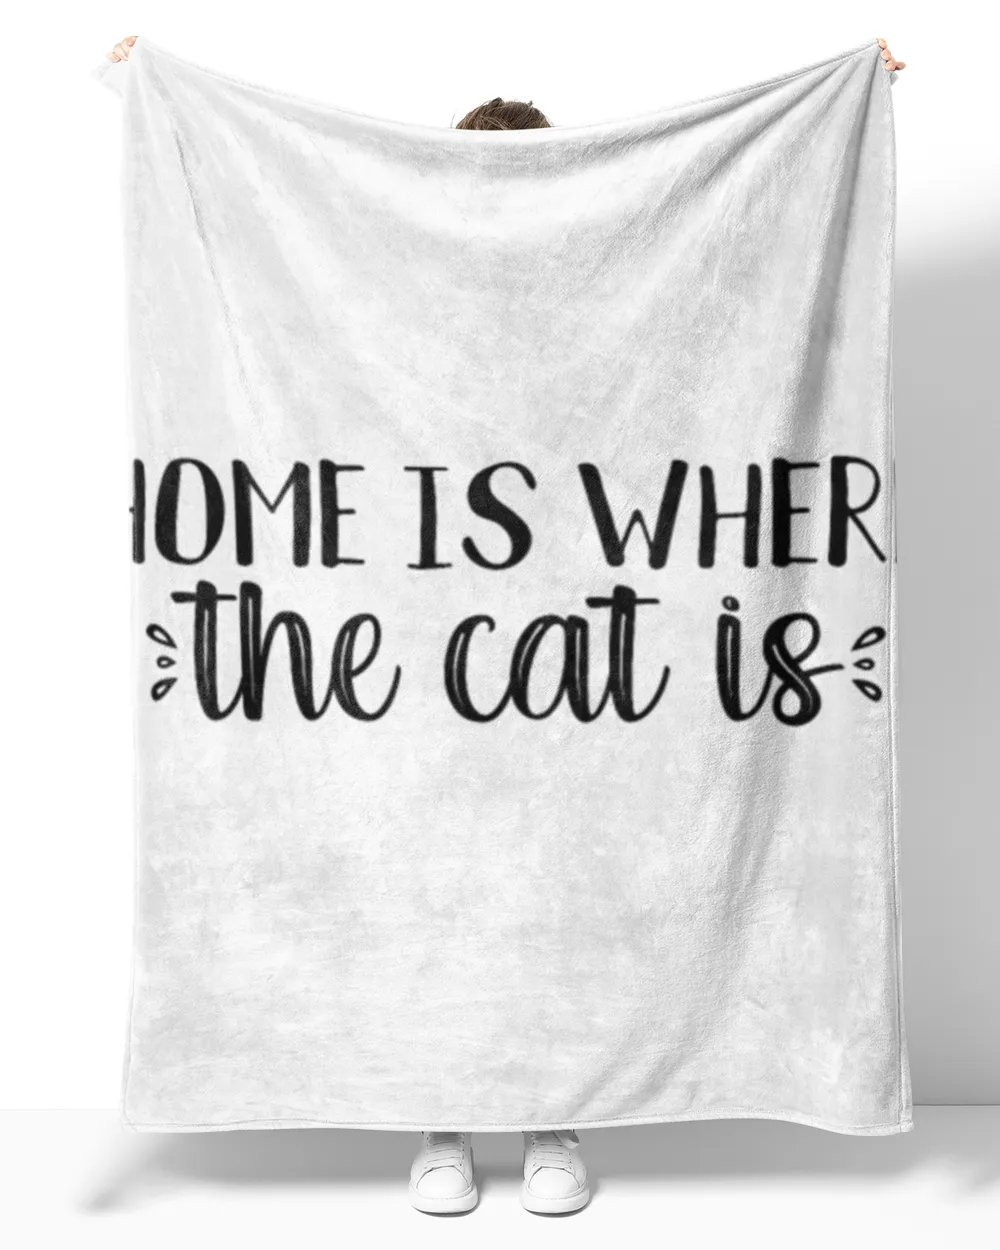 Home is where the cat is cat lover quote197